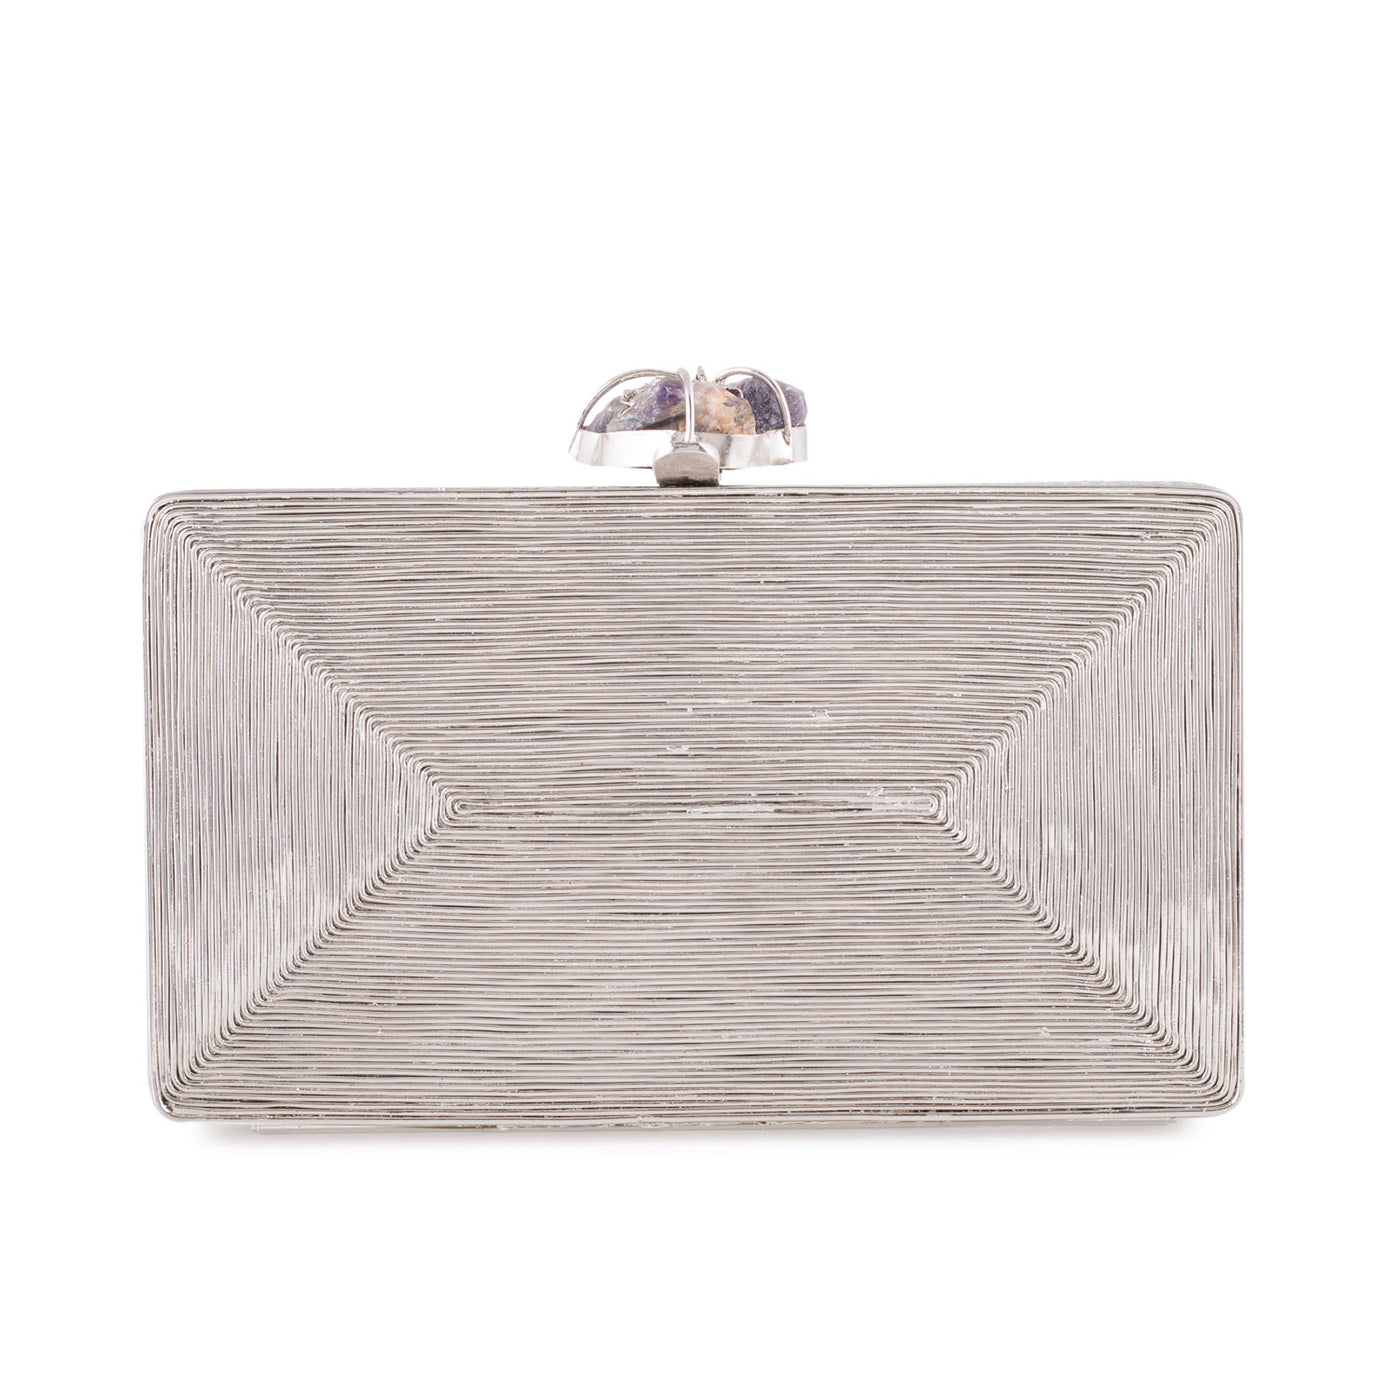 Handcrafted Luxury Clutches UAE